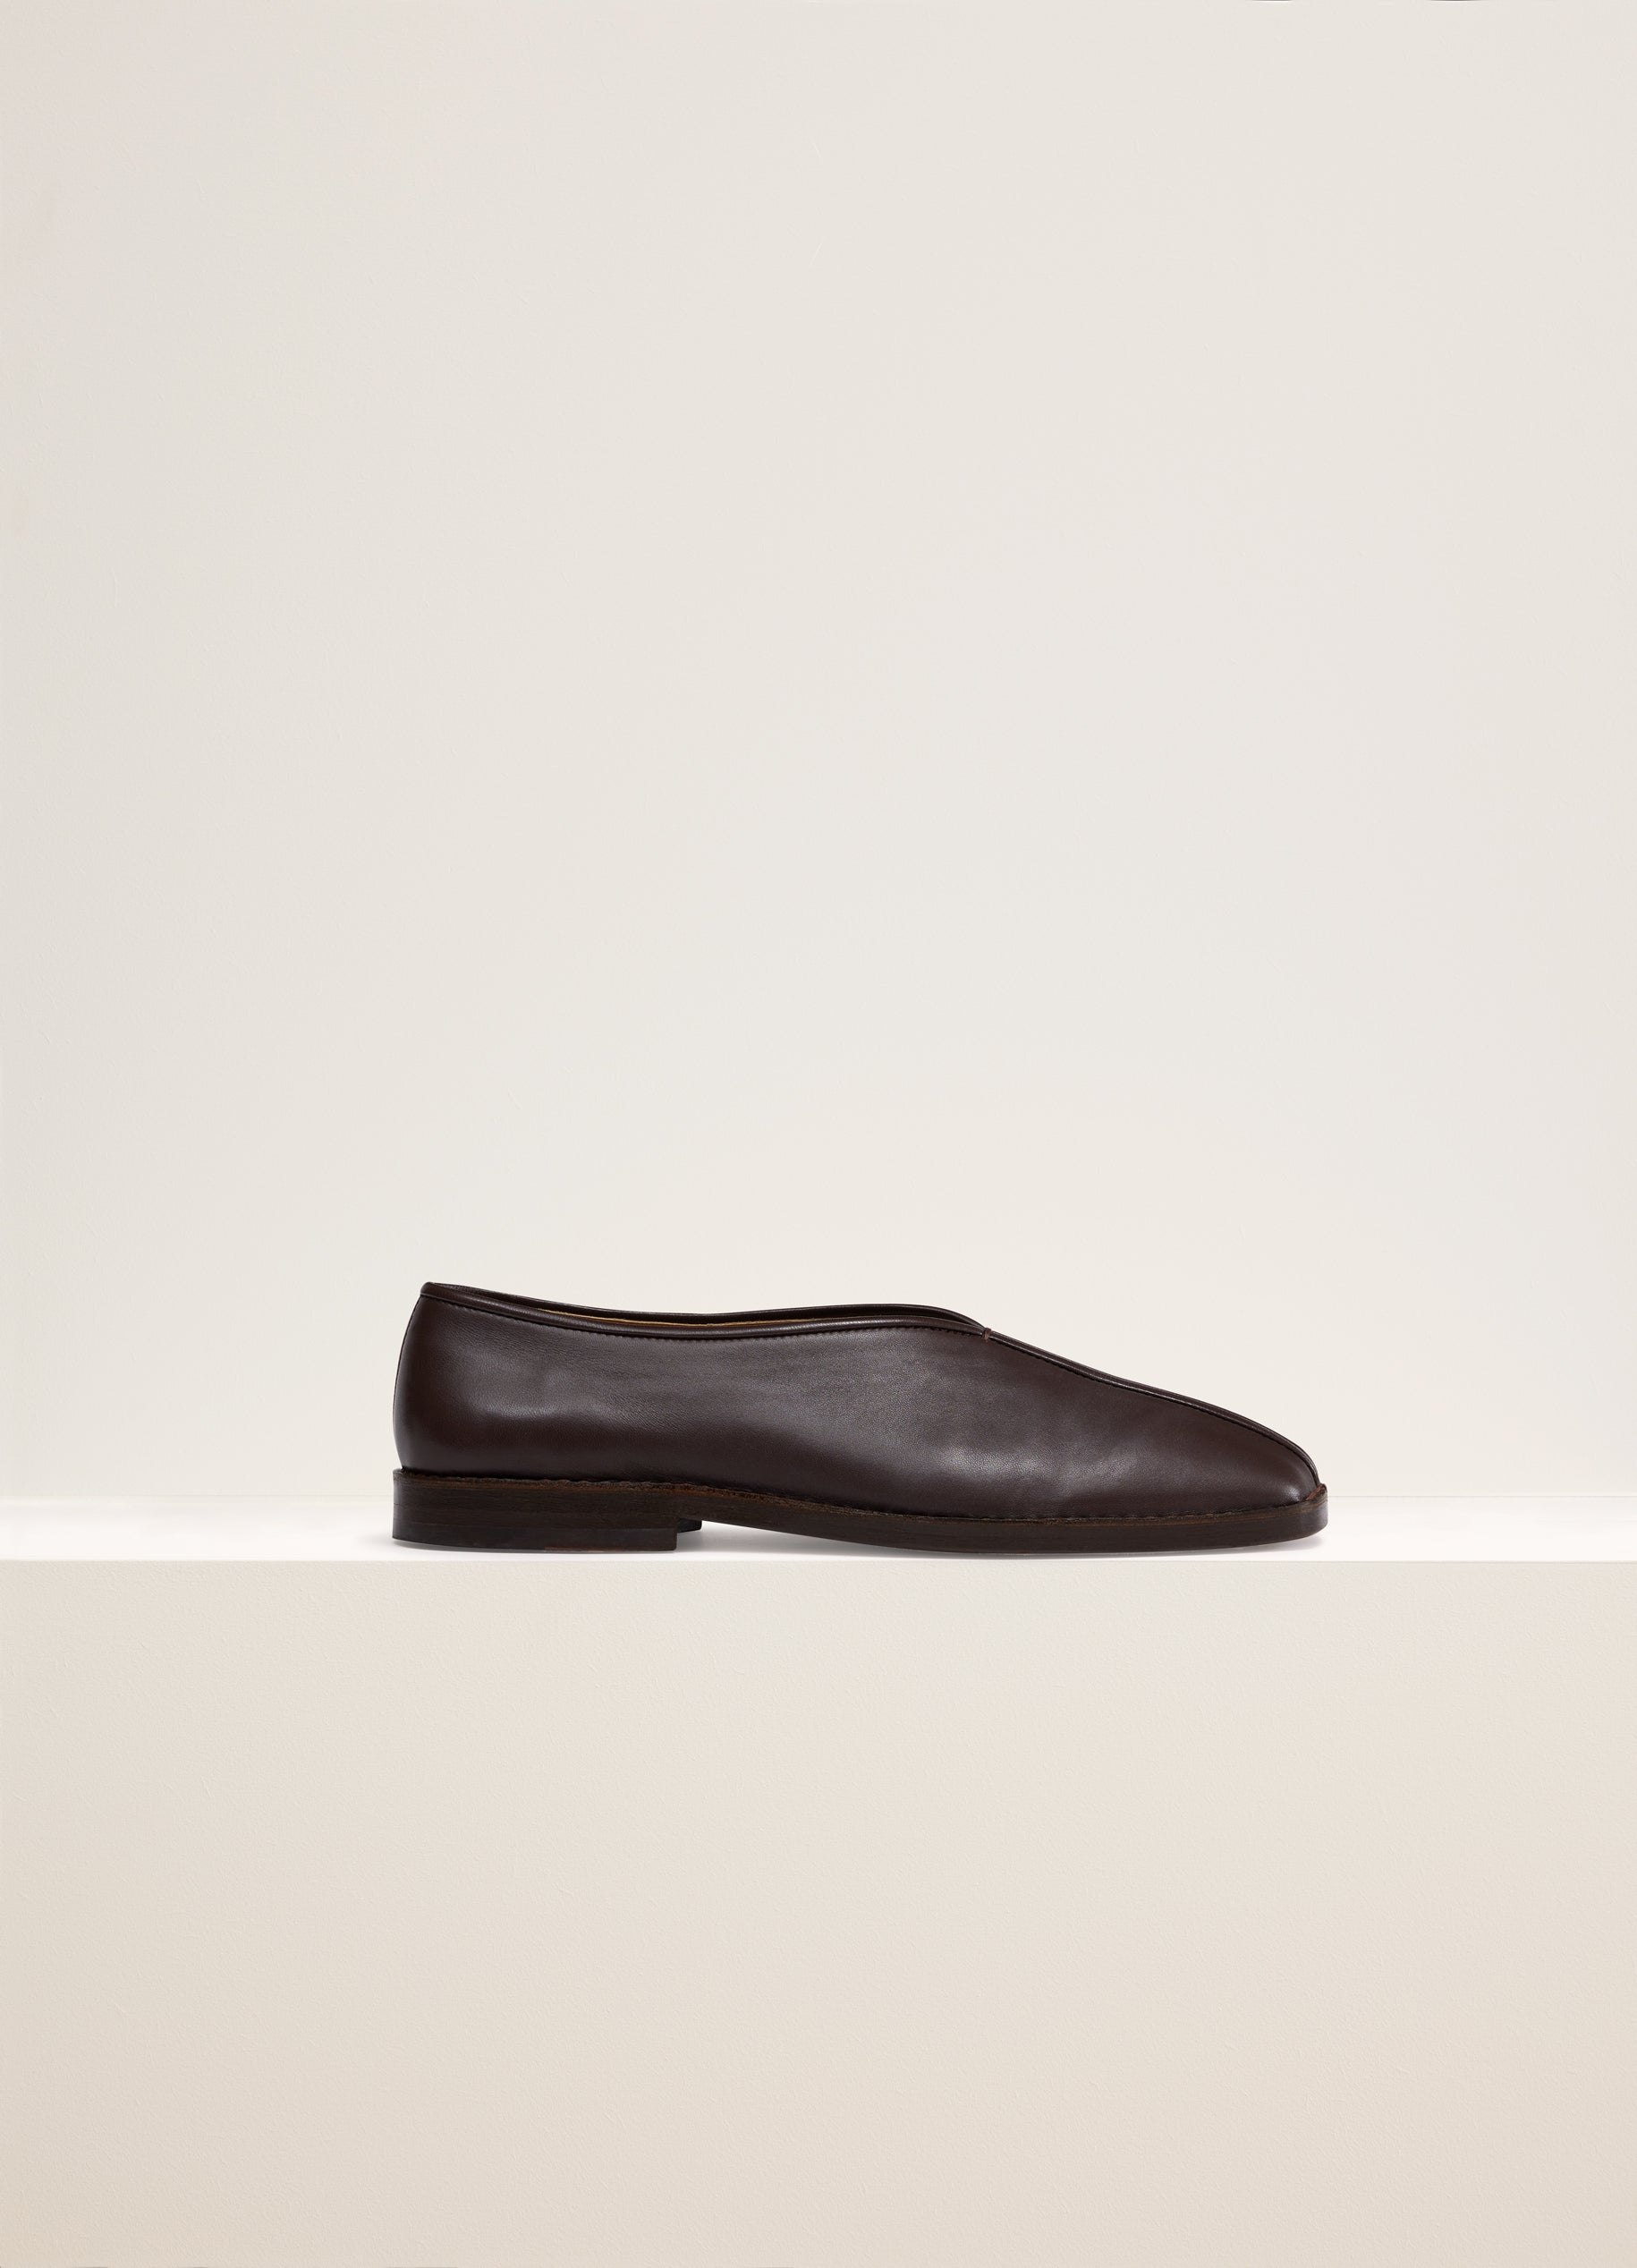 Pecan Brown Flat Piped Slippers in Shiny Nappa Lamb | LEMAIRE